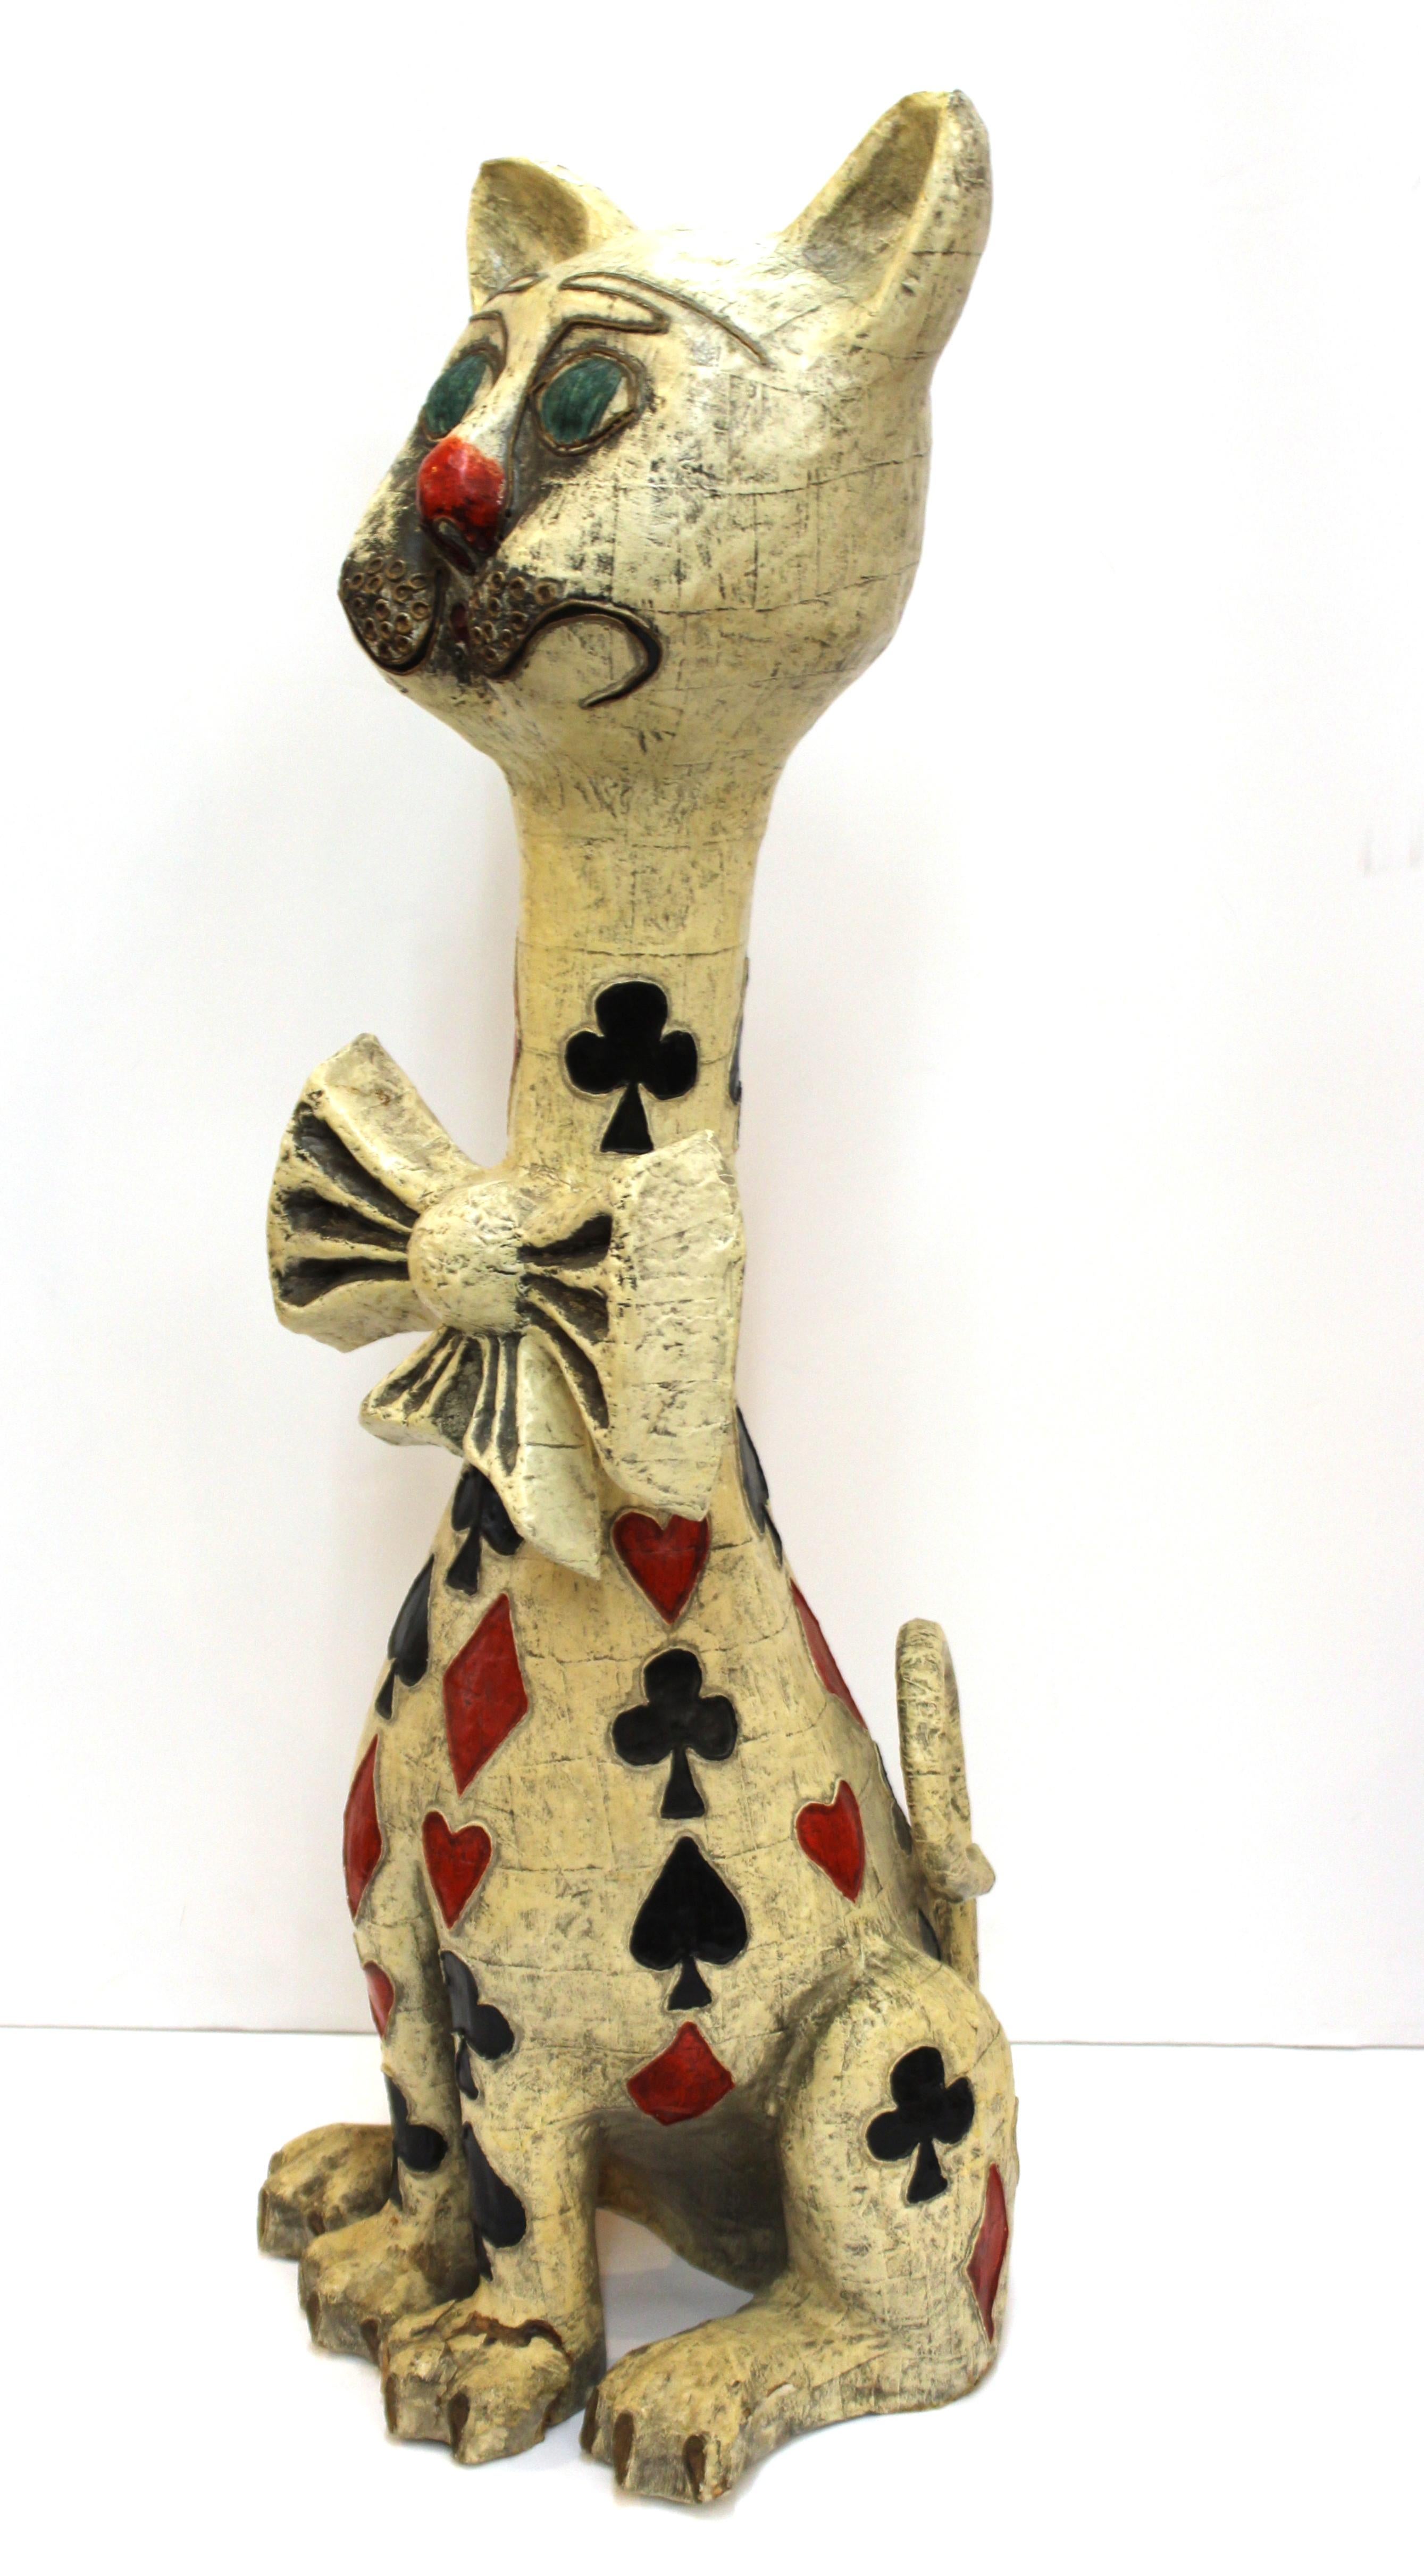 Mid-Century Modern large papier-mâché cat made by Mexican artist Jeanne Valentine. The piece is decorated with card motifs including hearts, diamonds, clubs and spades. Made during the 1970s, the piece is in great vintage condition with some minor